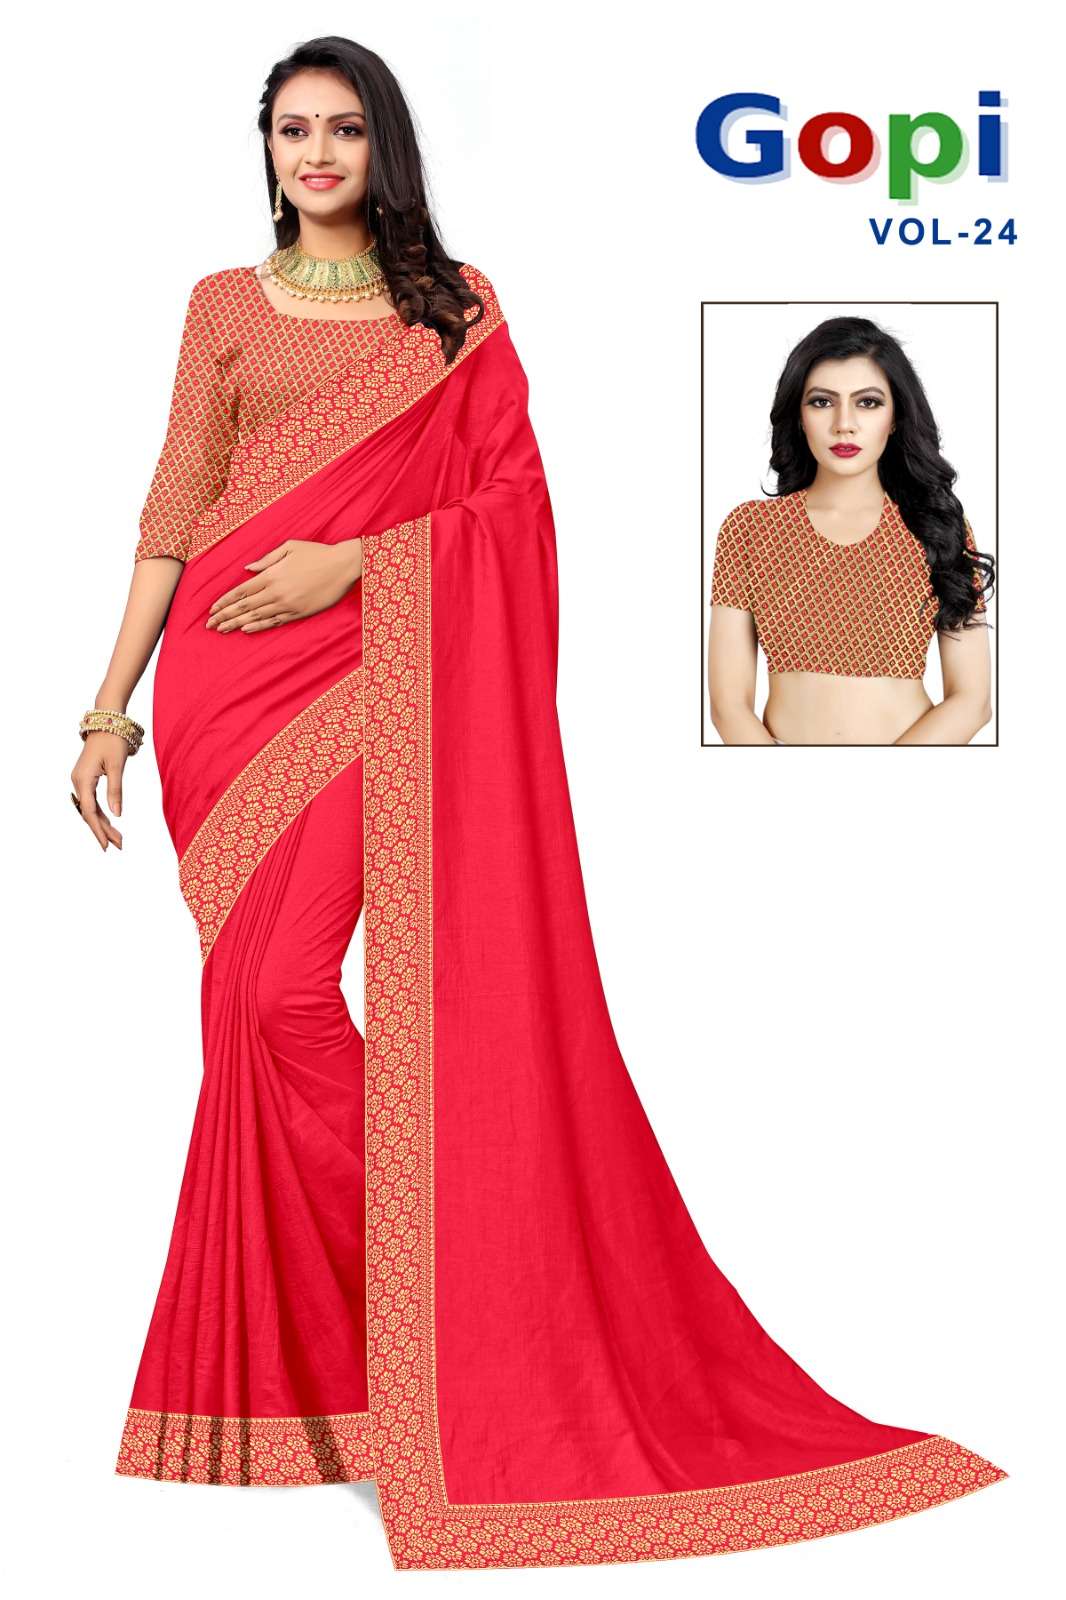 Paper Silk Sarees And Jute Brasso Sarees I Wholesale Shop  I@Rkcollectionssarees - YouTube